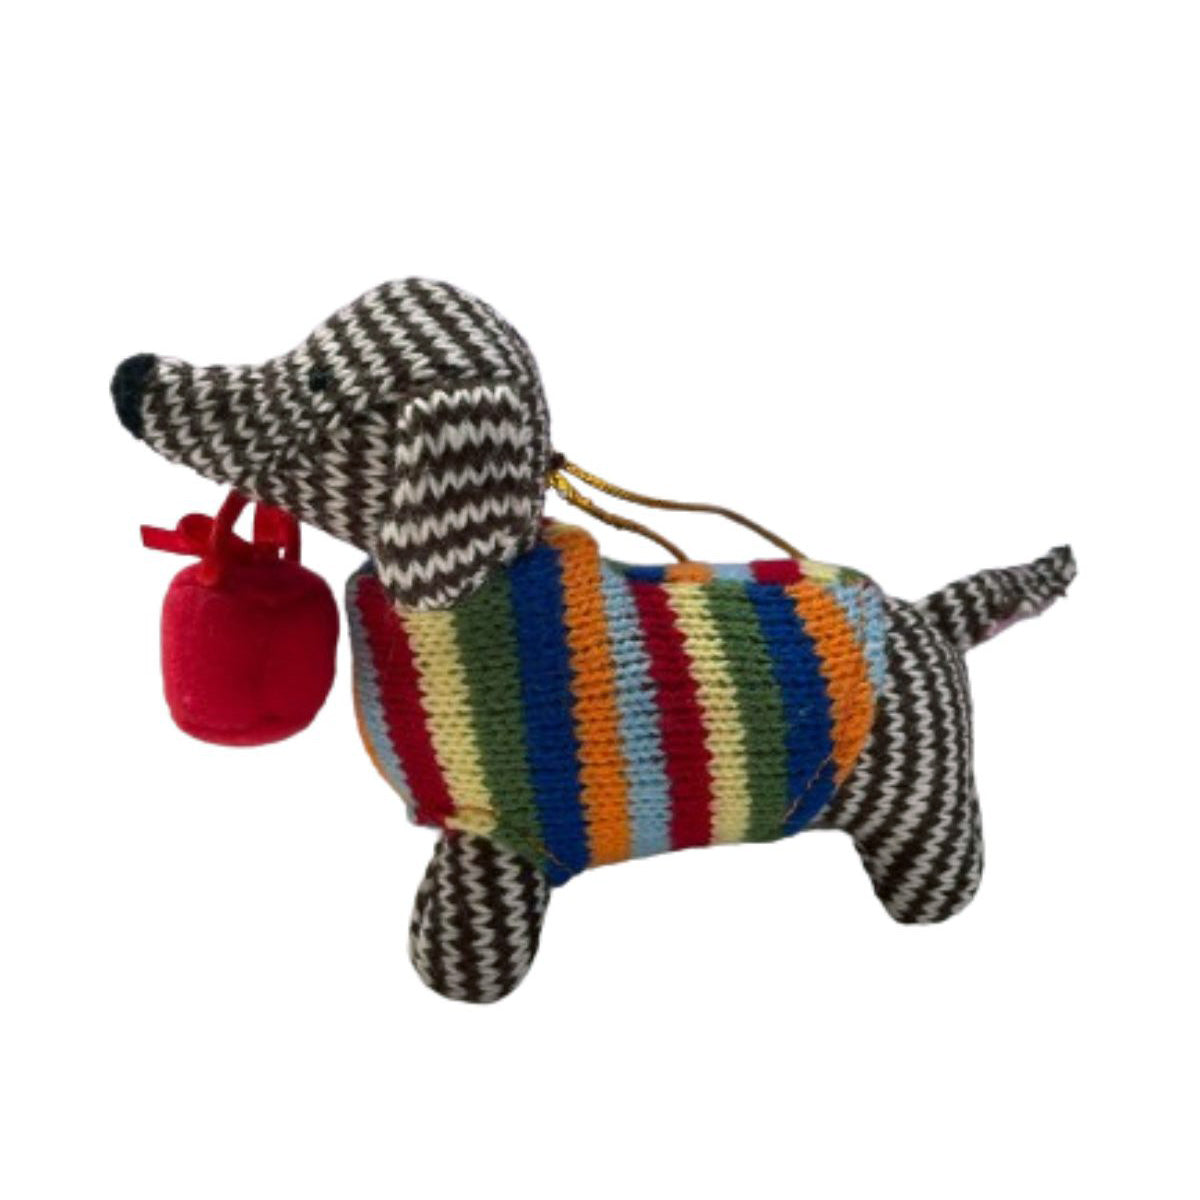 Knitted Ornament: Dachshund with Present - Chrysler Museum Shop